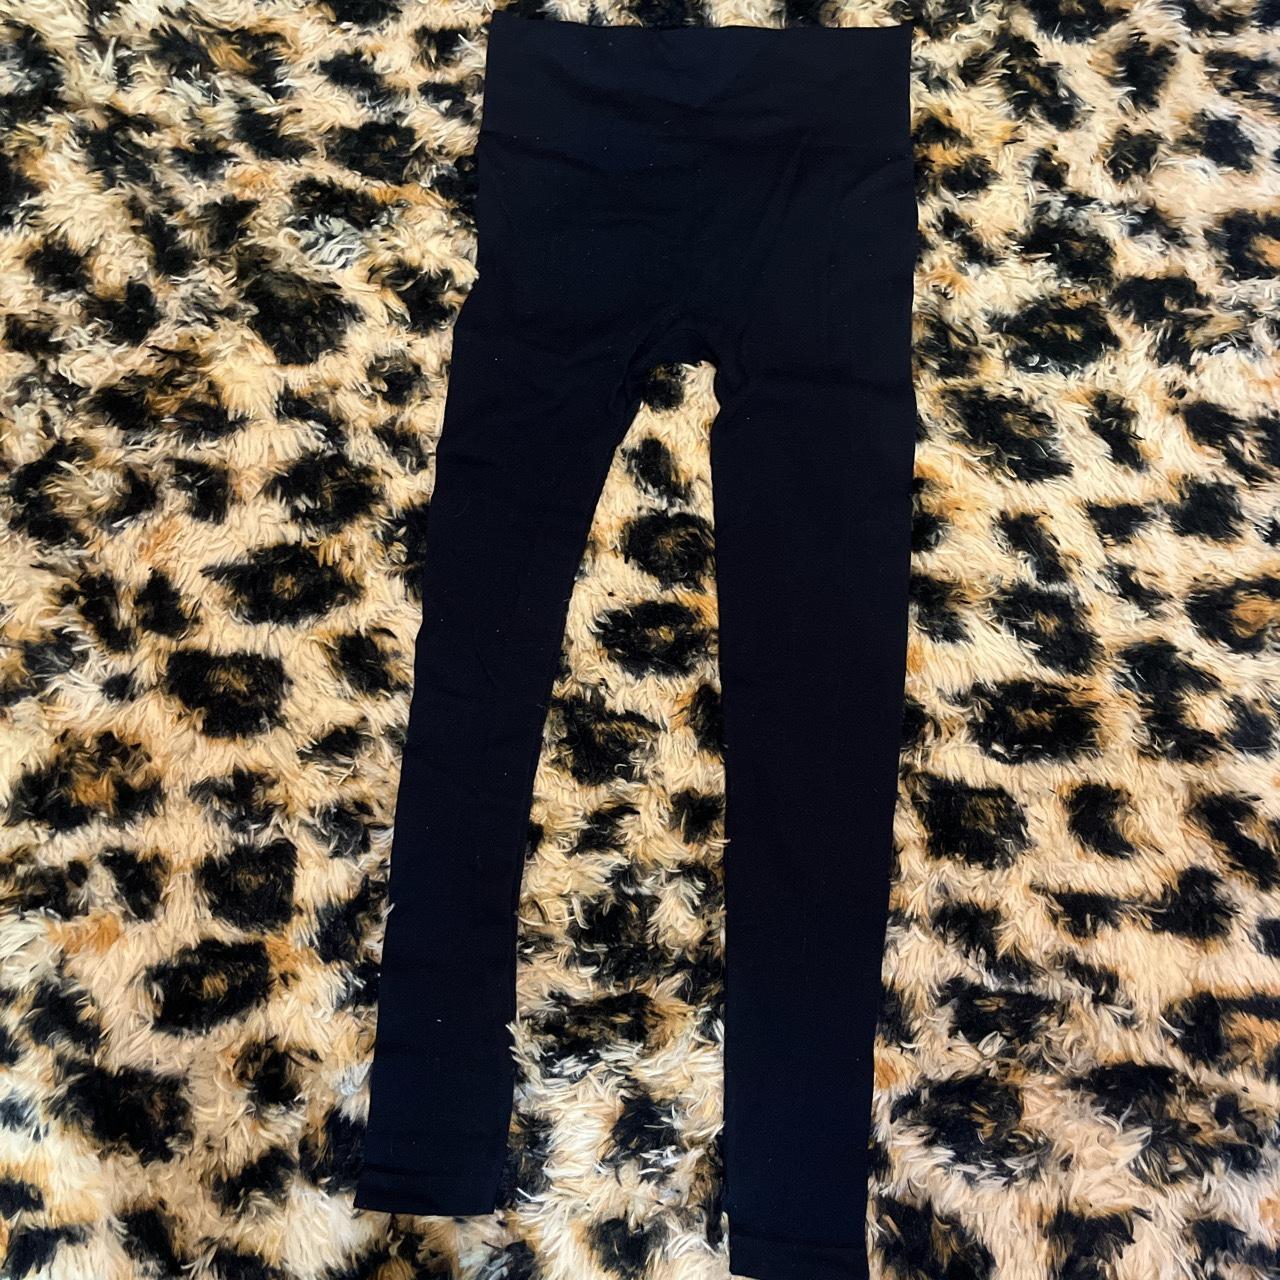 Pacsun ribbed leggings Super soft and - Depop